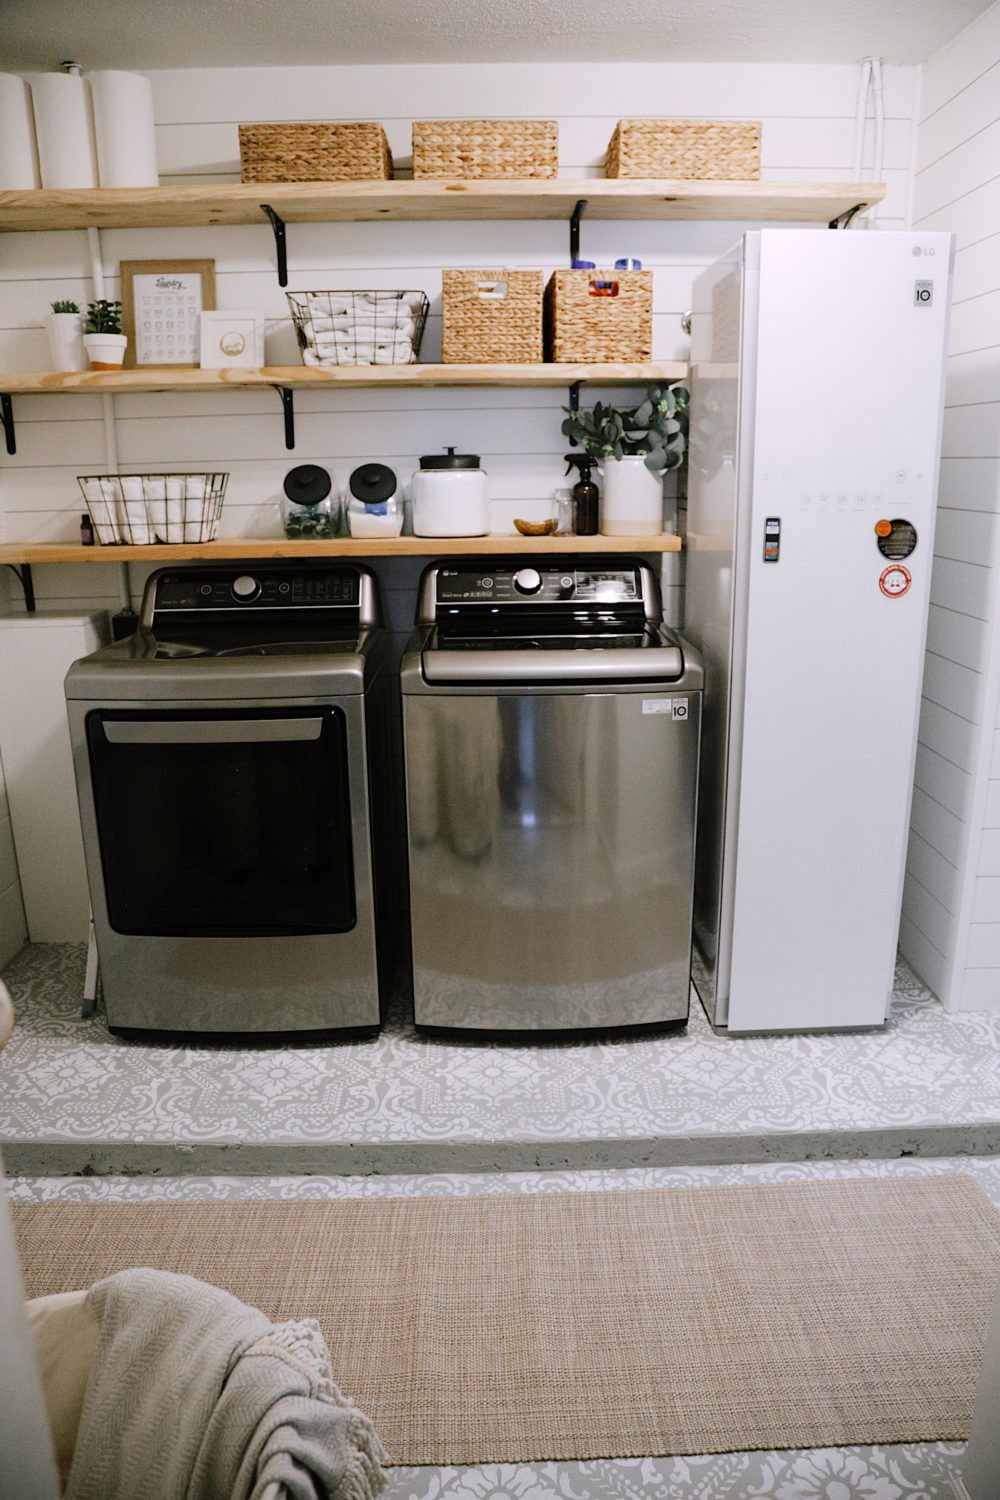 How We Designed a Family Friendly Laundry Room in our Garage - The Reveal! | How We Designed a Family Friendly Laundry Room in our Garage - The Reveal! by popular Florida DIY blog, Fresh Mommy: image of a family friendly laundry room.